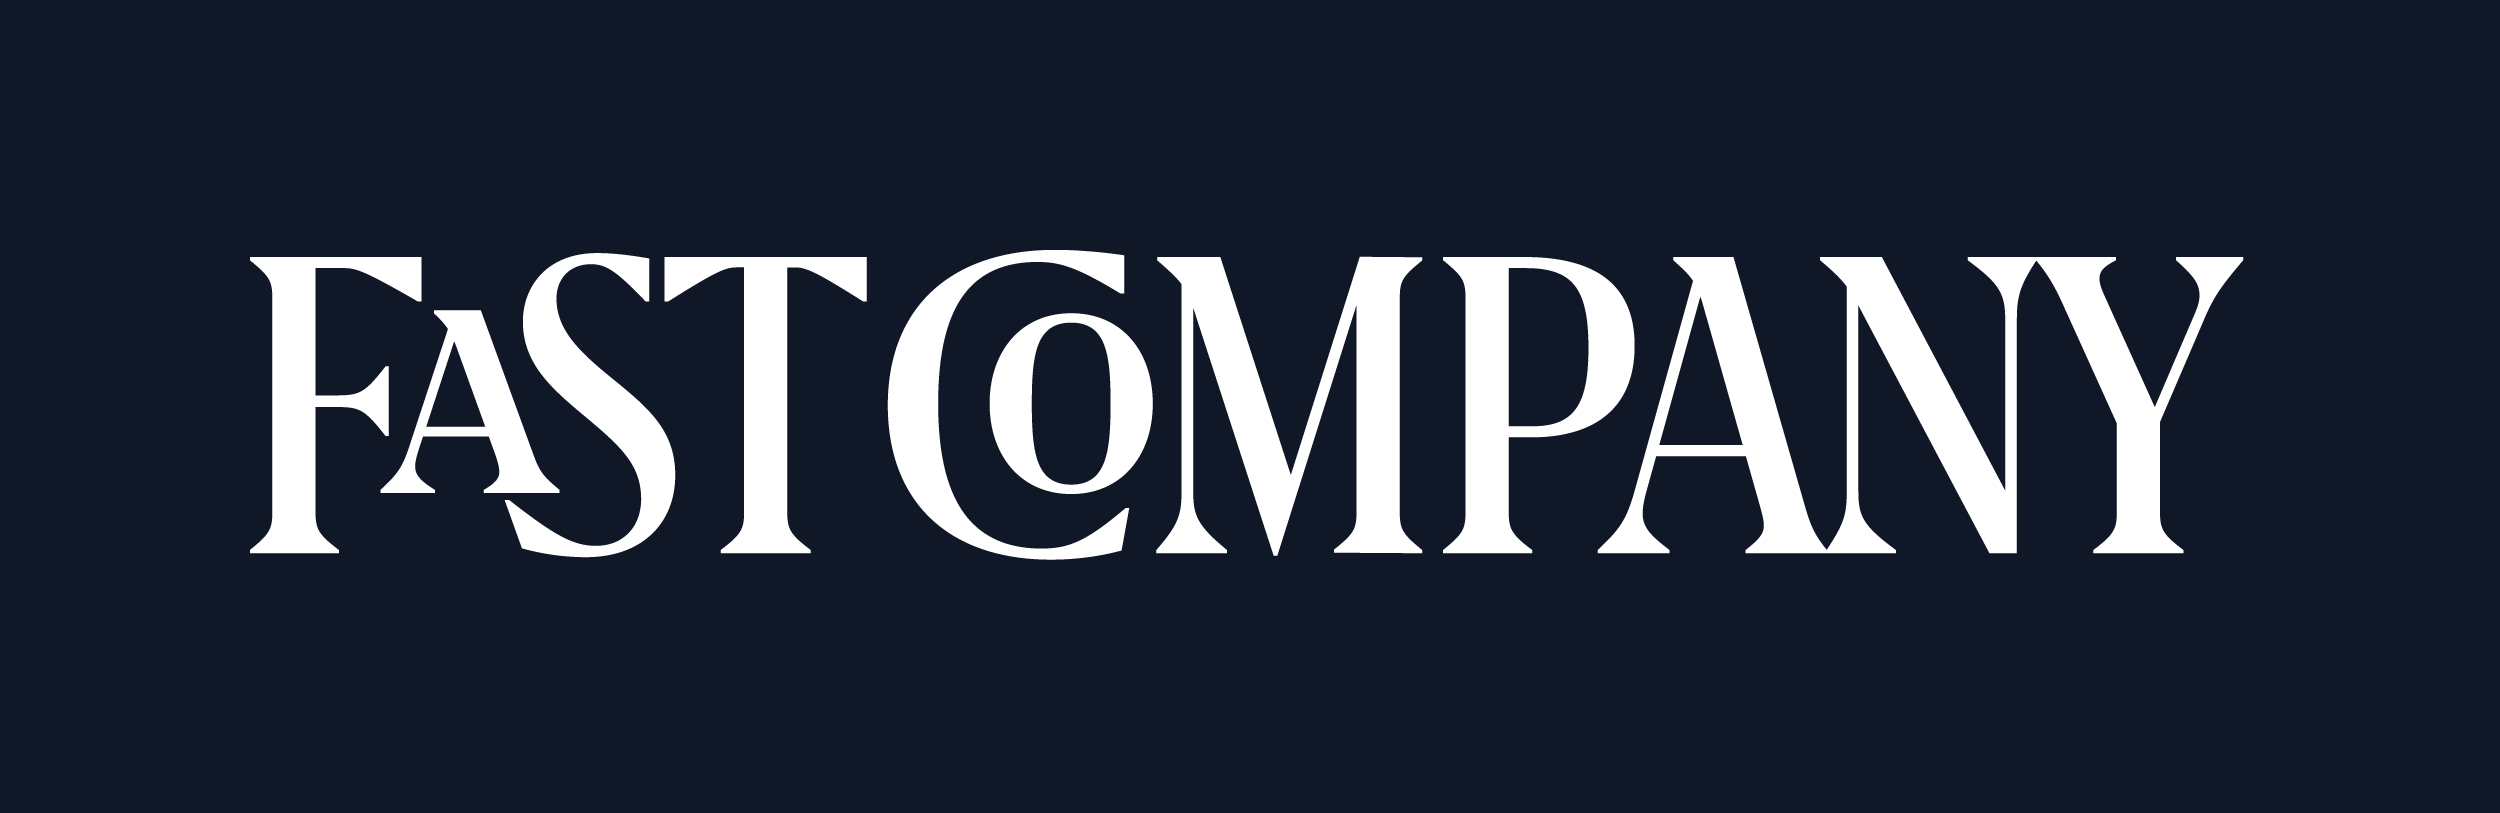 Brand New: New Logo for Fast Company by Rui Abreu and In-house